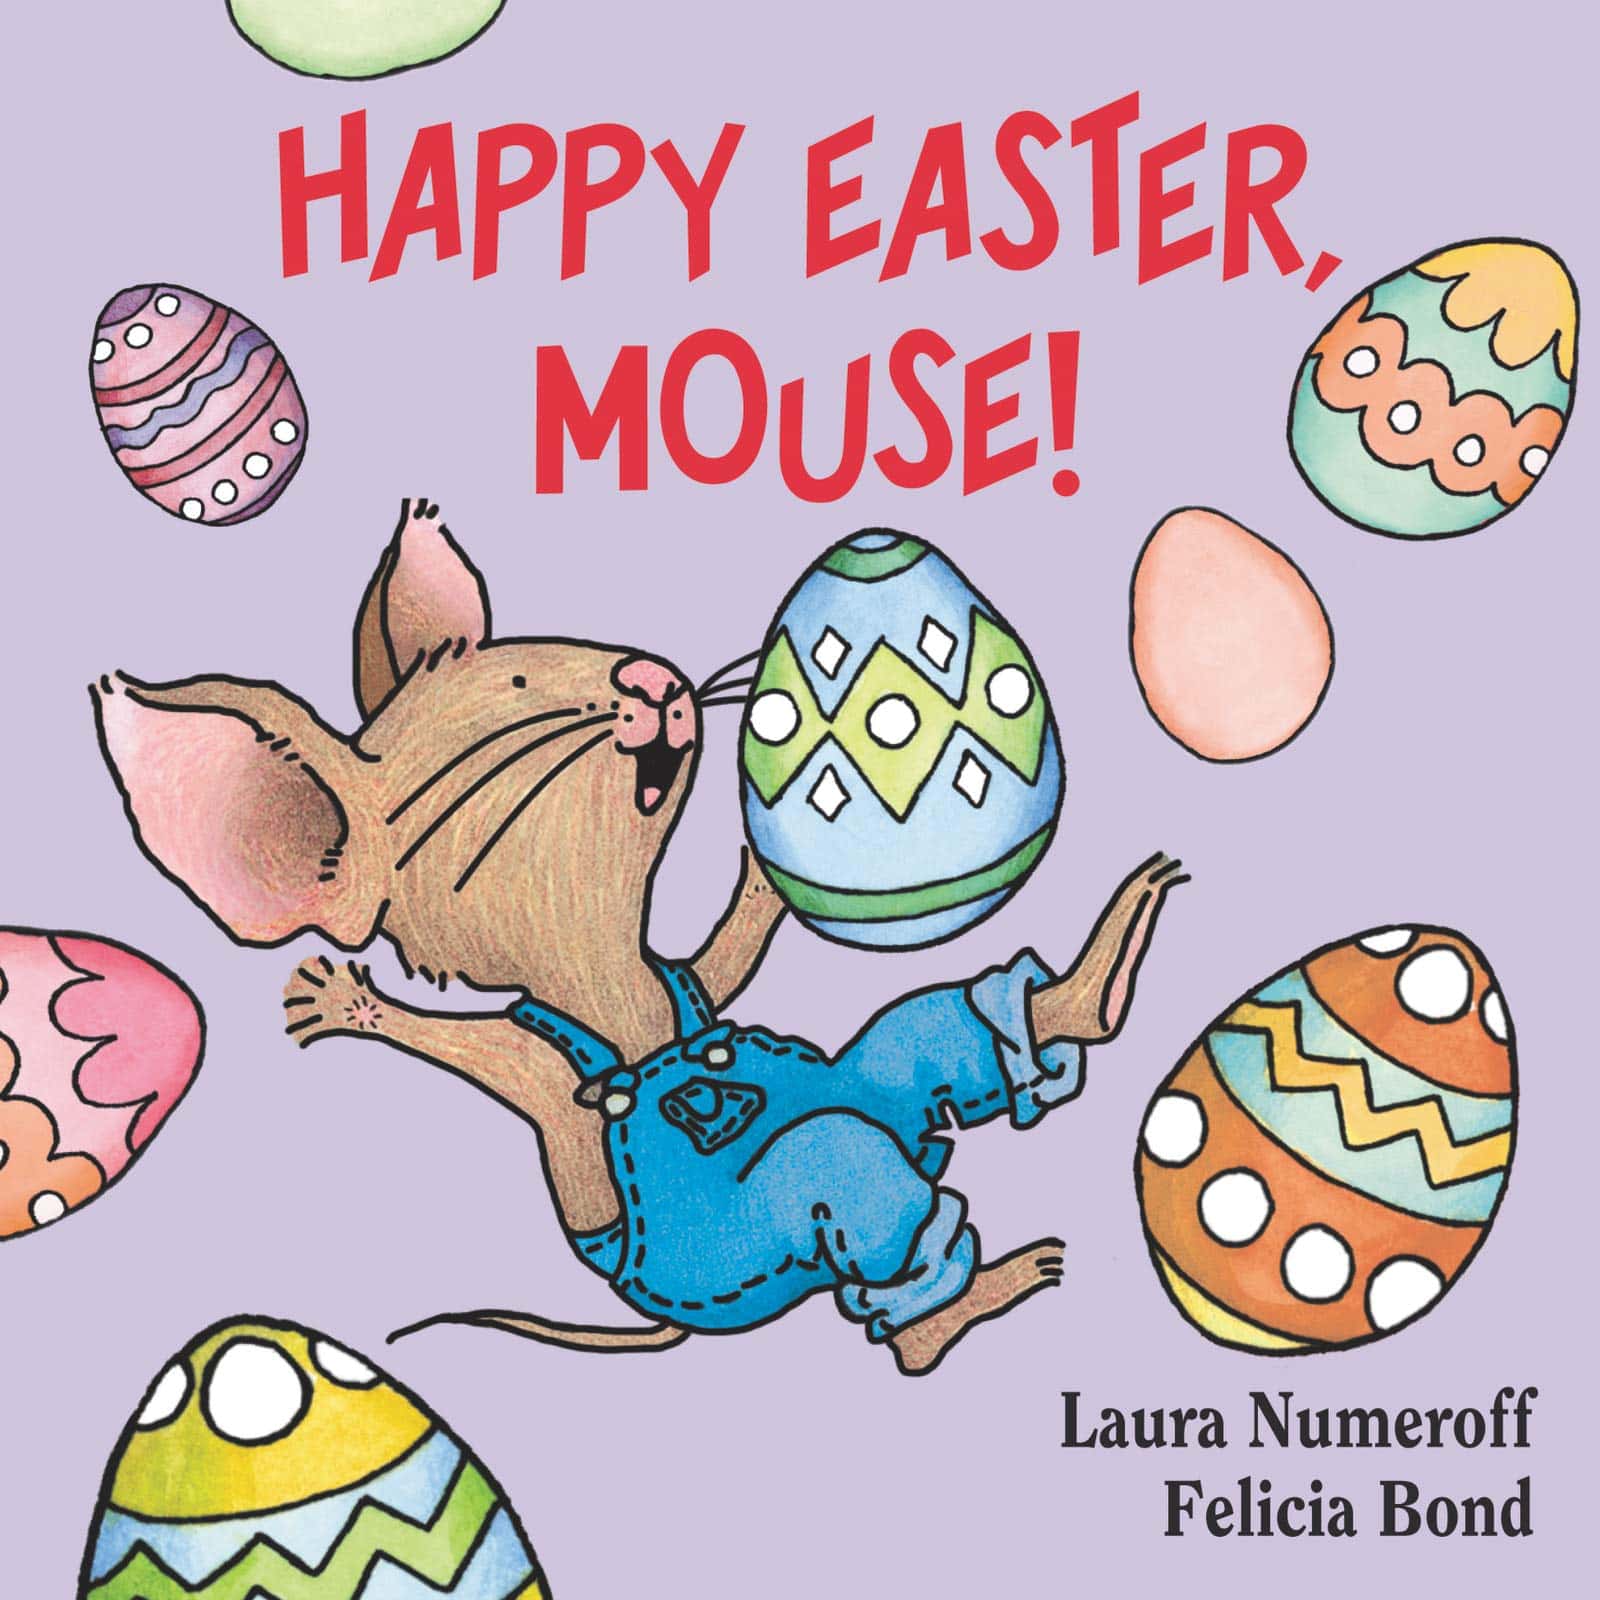 Happy Easter, Mouse! book